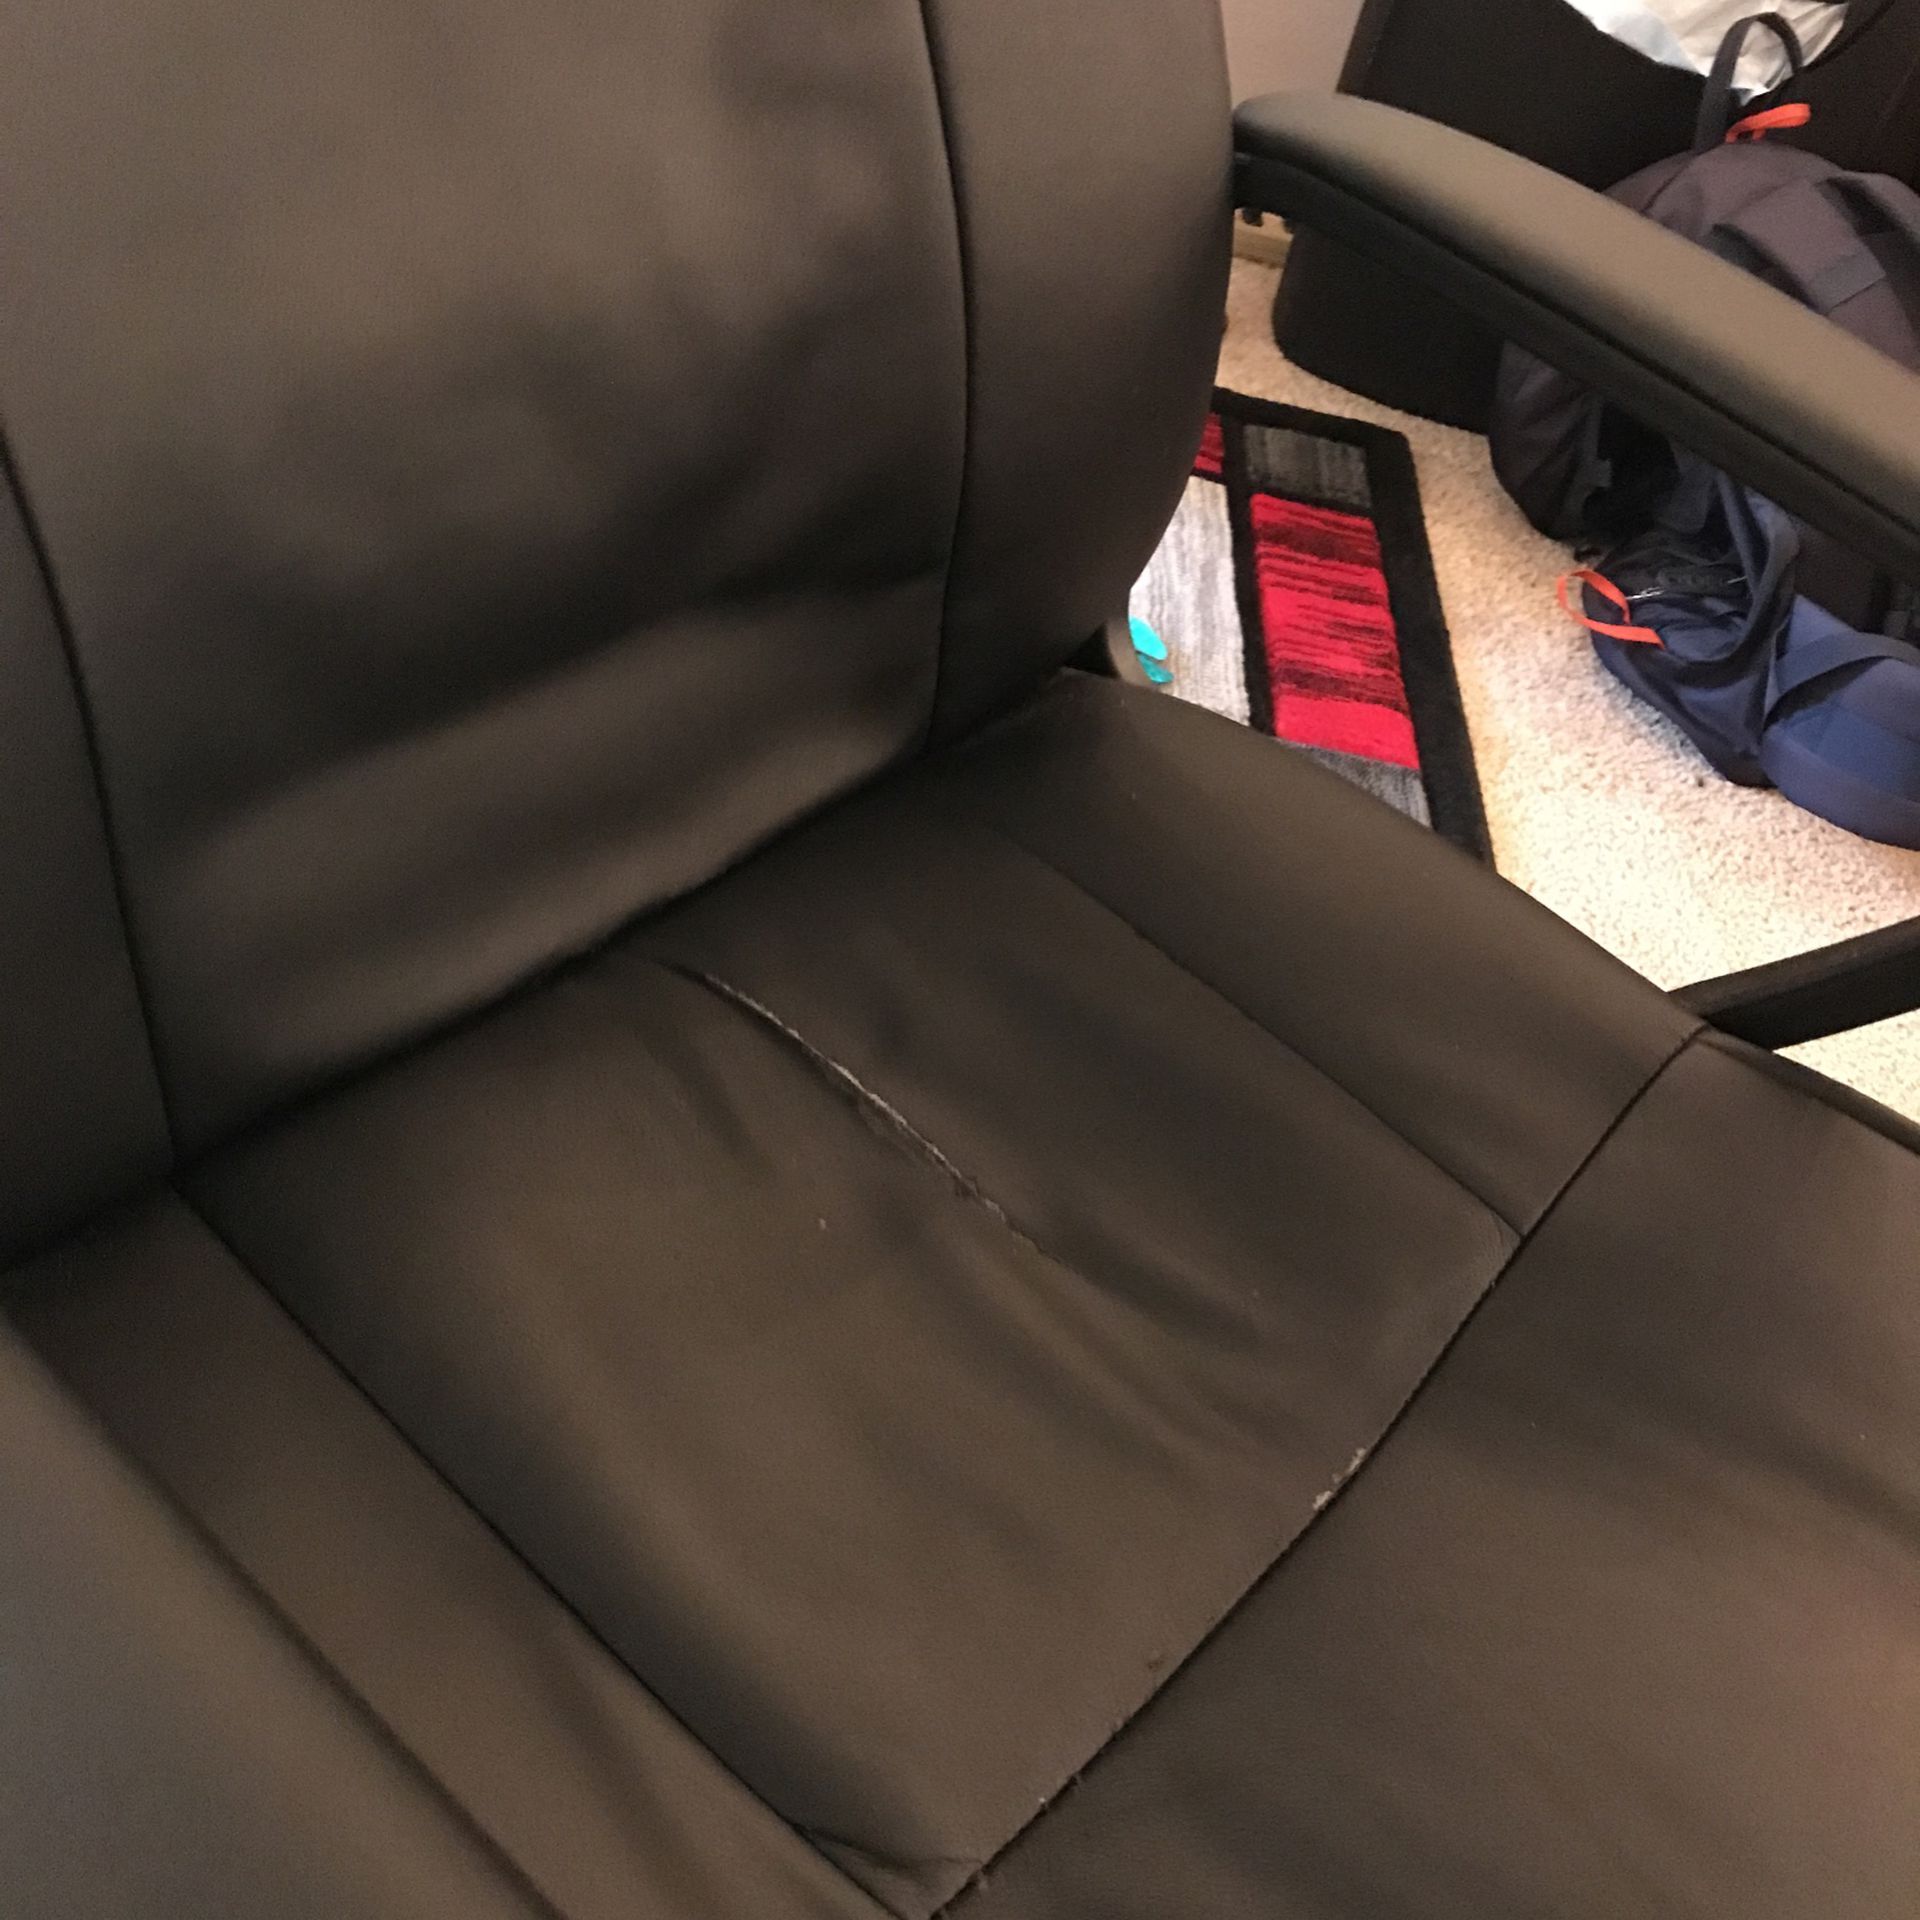 Black Leather Rolling Comfy Office Chair $35